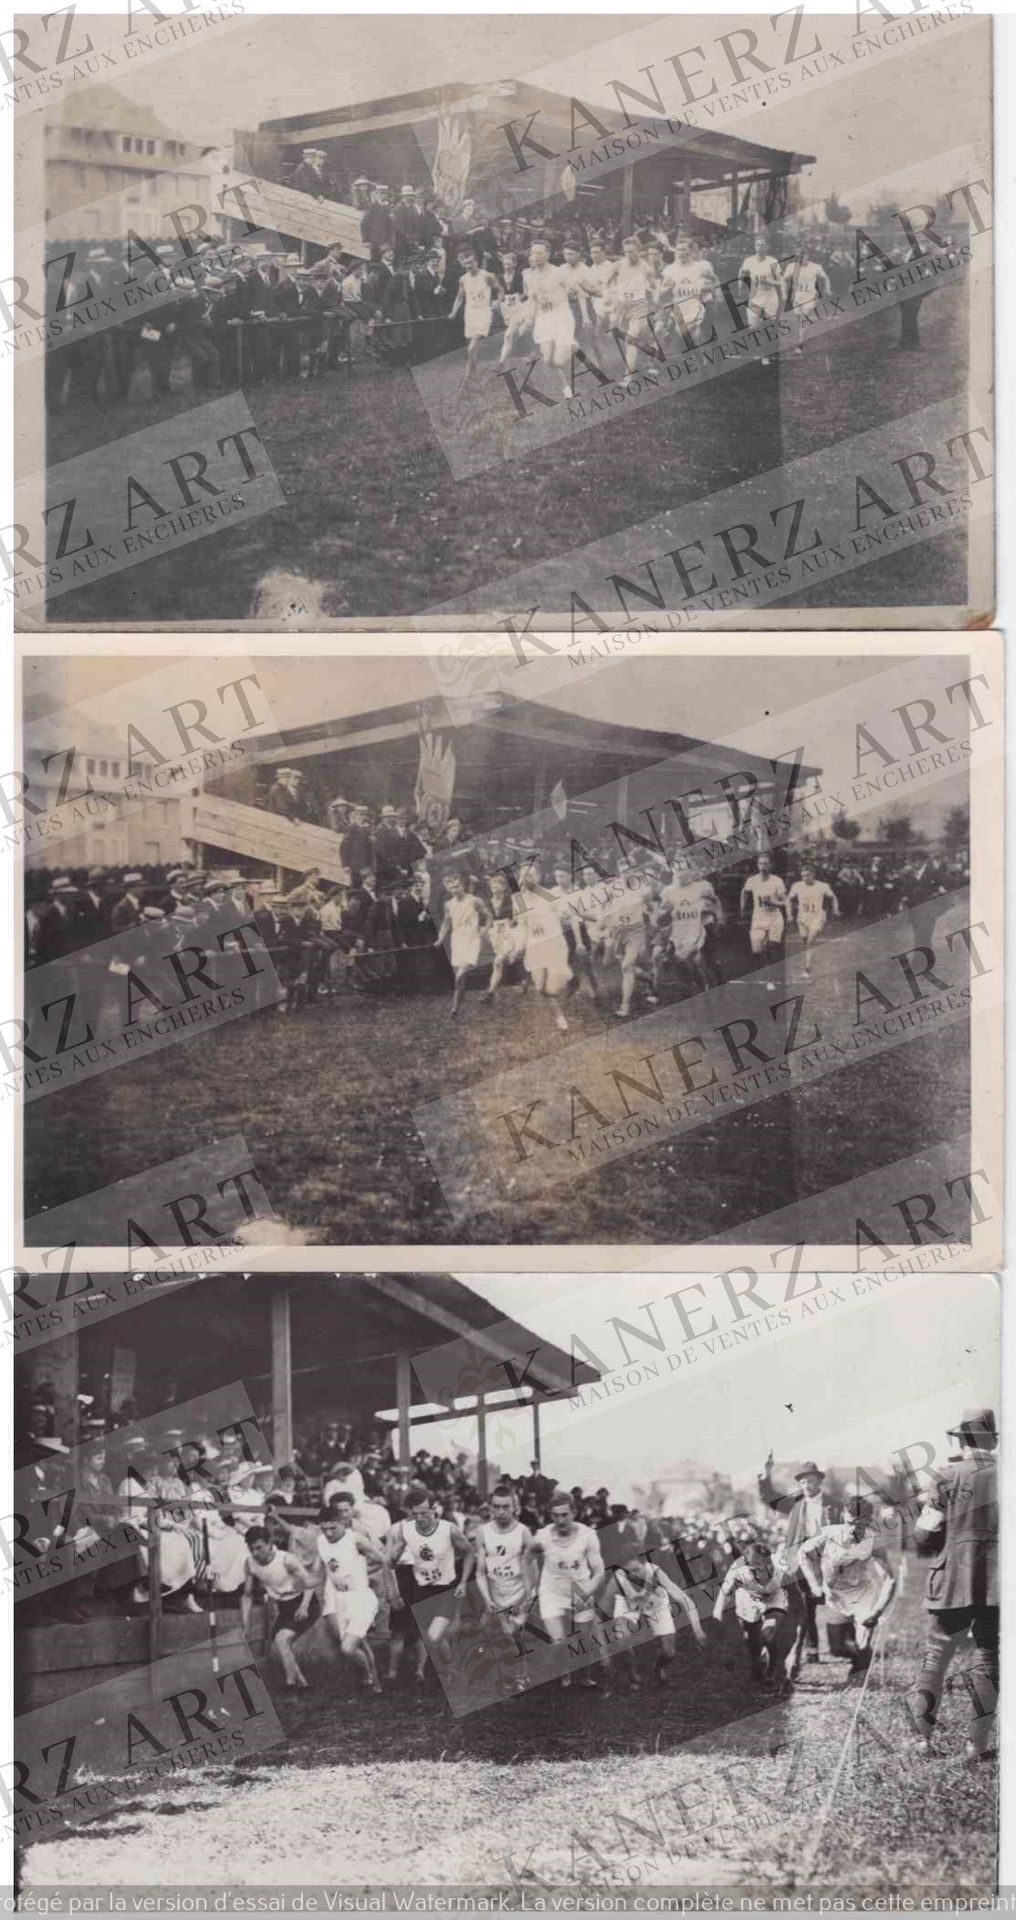 Null (SPORT/CROSS) 4 photo cards of the start of a race, 1910s (2x2 models)